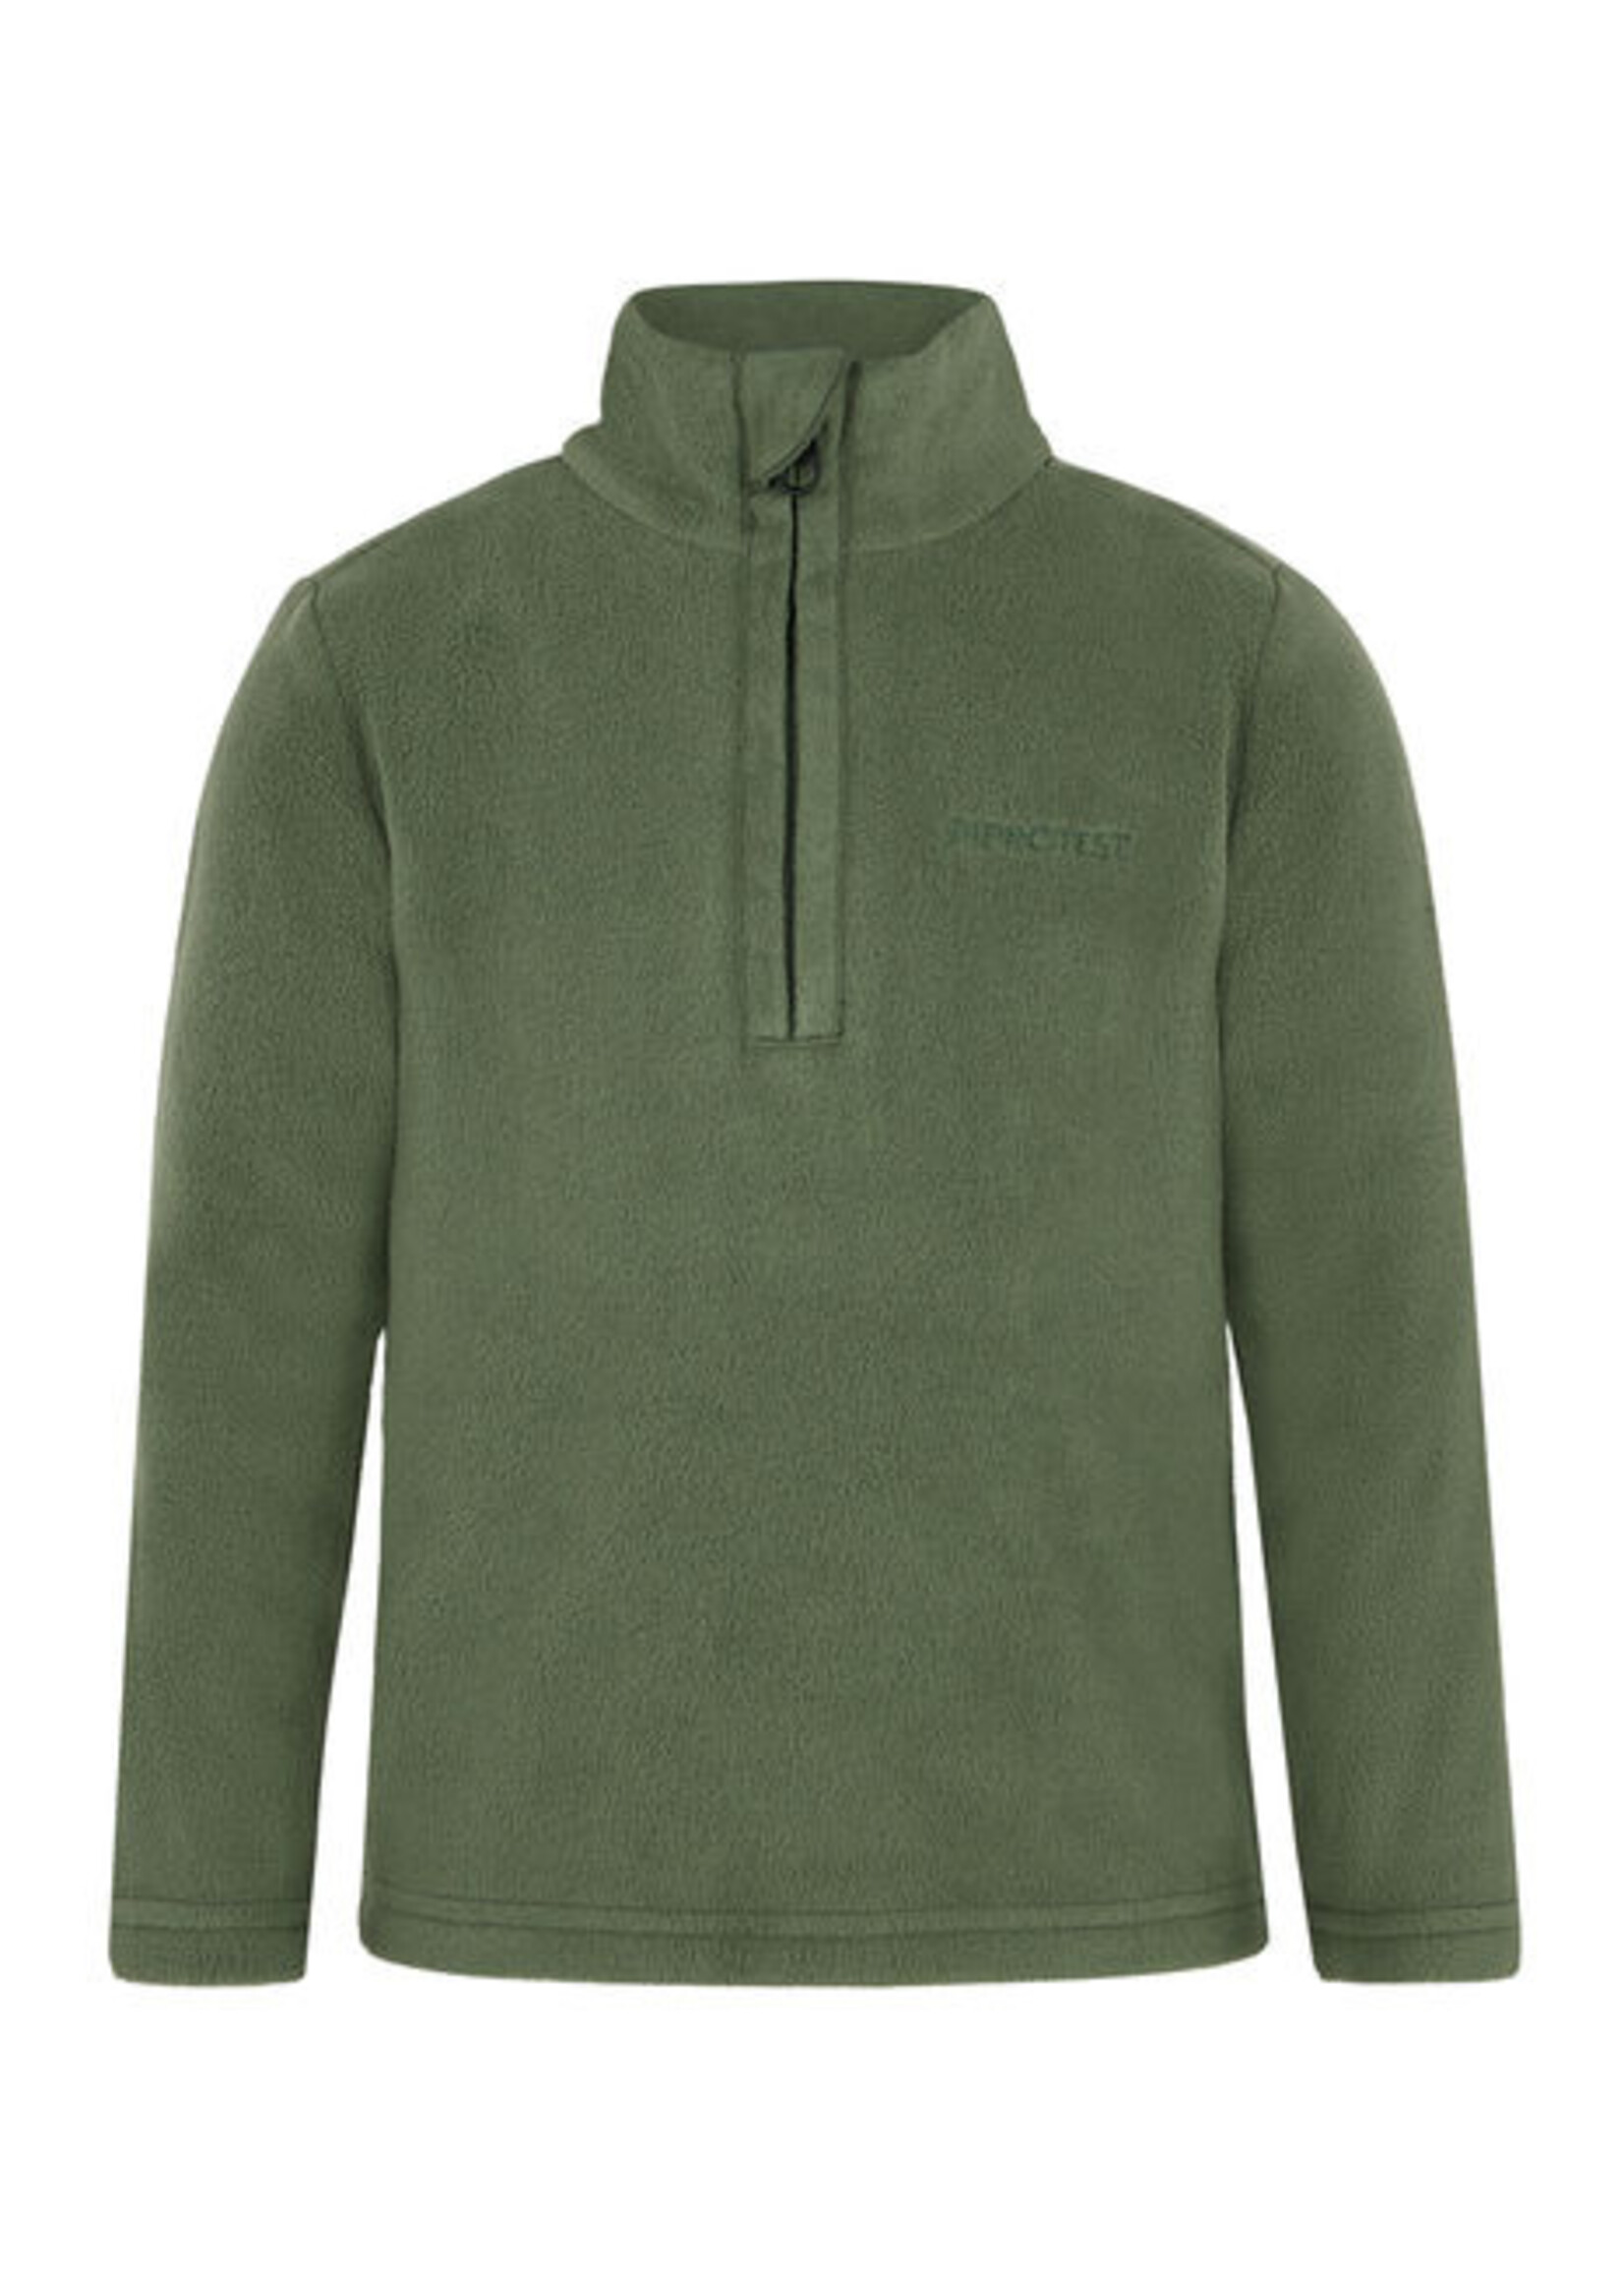 PROTEST  PERFECT TD 1/4 zip top-Thyme